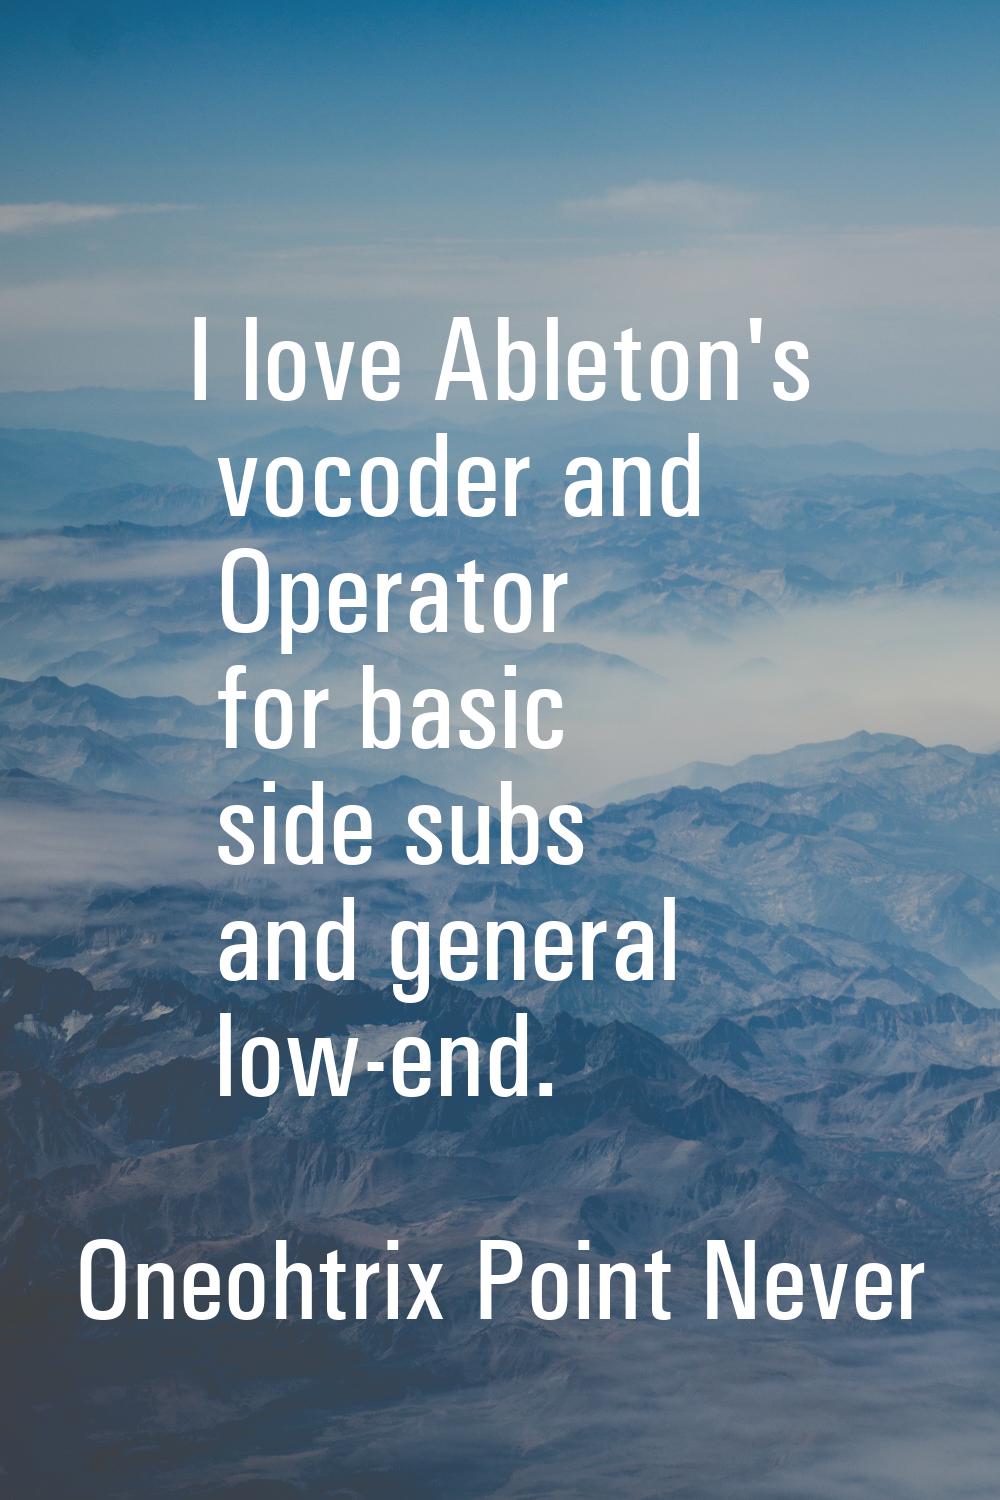 I love Ableton's vocoder and Operator for basic side subs and general low-end.